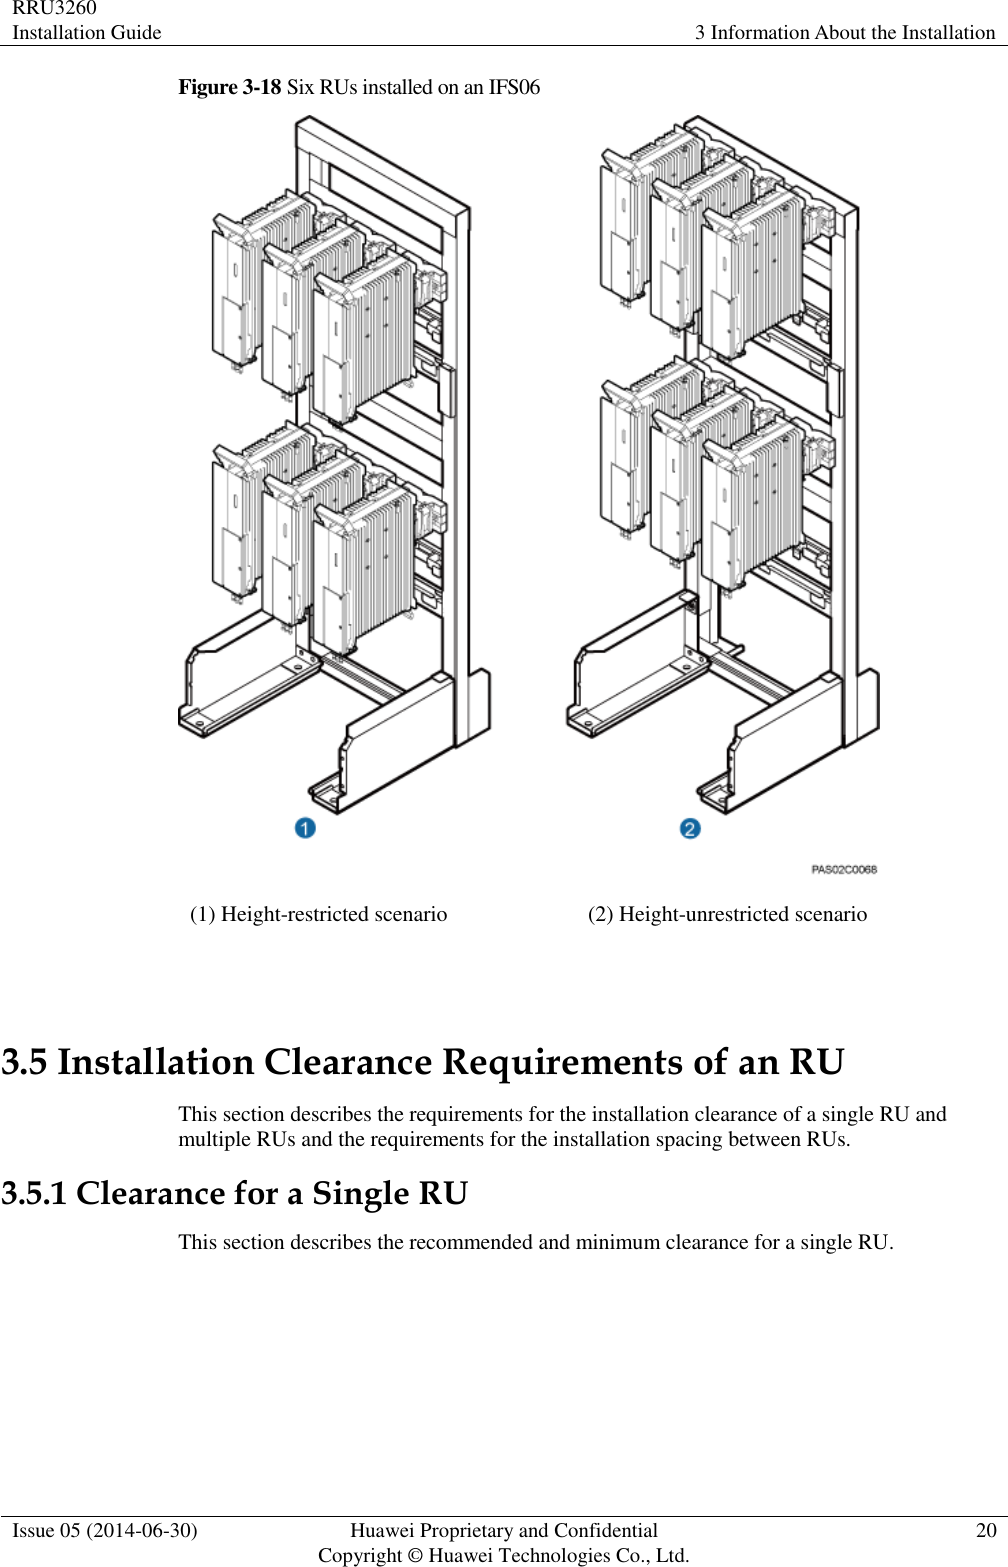 RRU3260 Installation Guide 3 Information About the Installation  Issue 05 (2014-06-30) Huawei Proprietary and Confidential                                     Copyright © Huawei Technologies Co., Ltd. 20  Figure 3-18 Six RUs installed on an IFS06  (1) Height-restricted scenario (2) Height-unrestricted scenario  3.5 Installation Clearance Requirements of an RU This section describes the requirements for the installation clearance of a single RU and multiple RUs and the requirements for the installation spacing between RUs. 3.5.1 Clearance for a Single RU This section describes the recommended and minimum clearance for a single RU.  